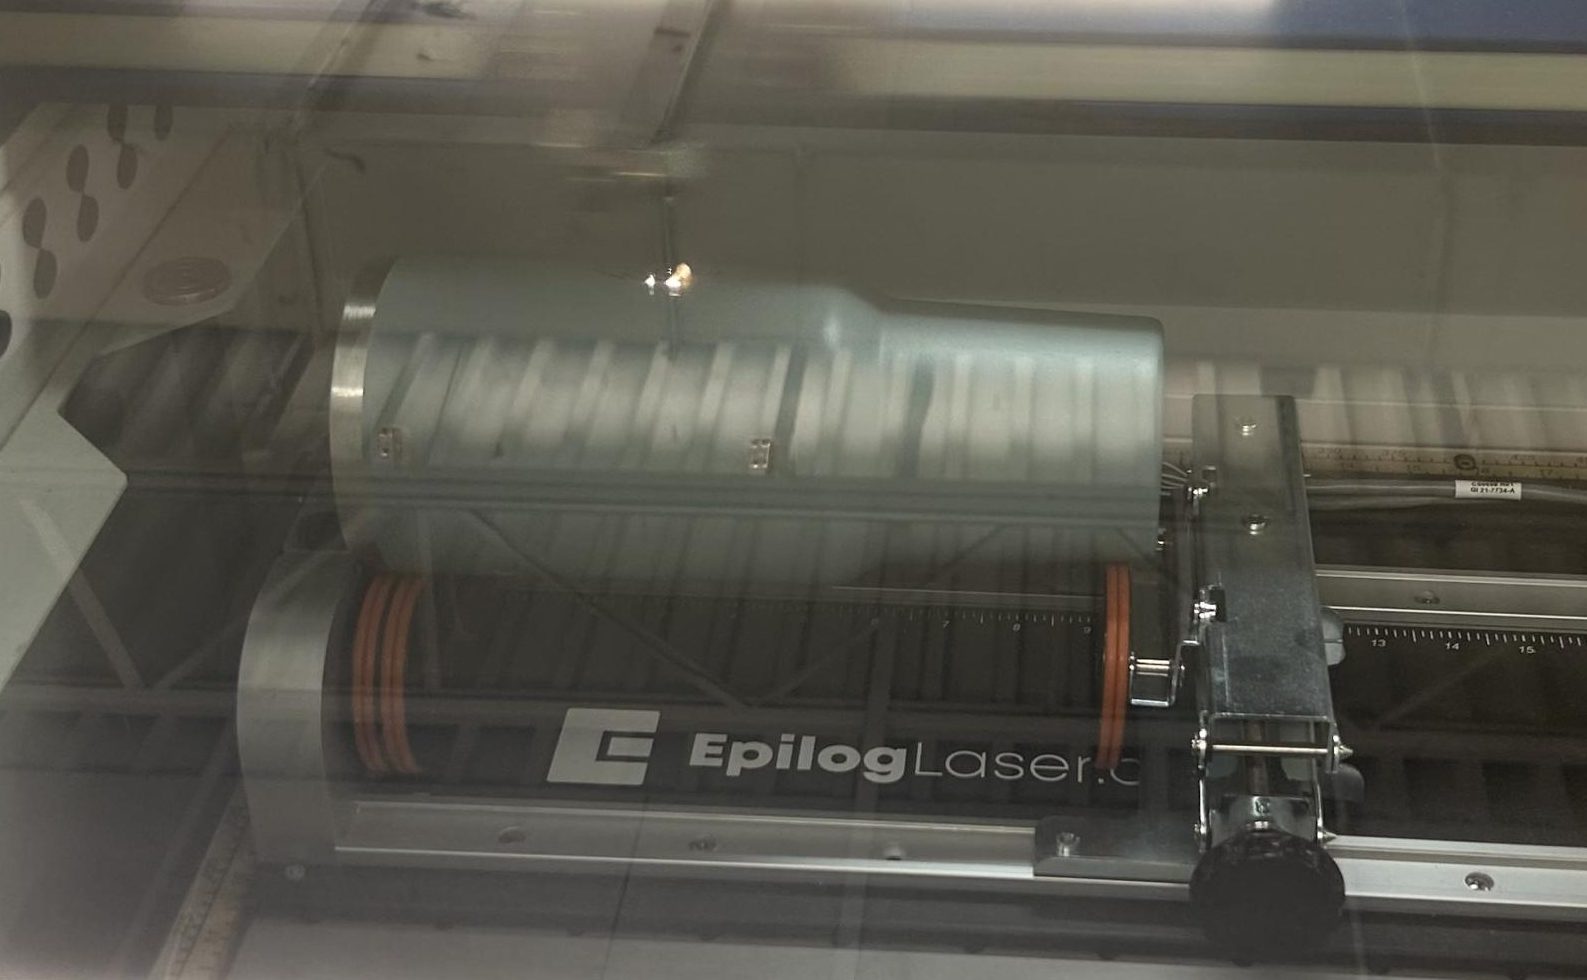 The engraving machine takes over to etch the design into the cup.